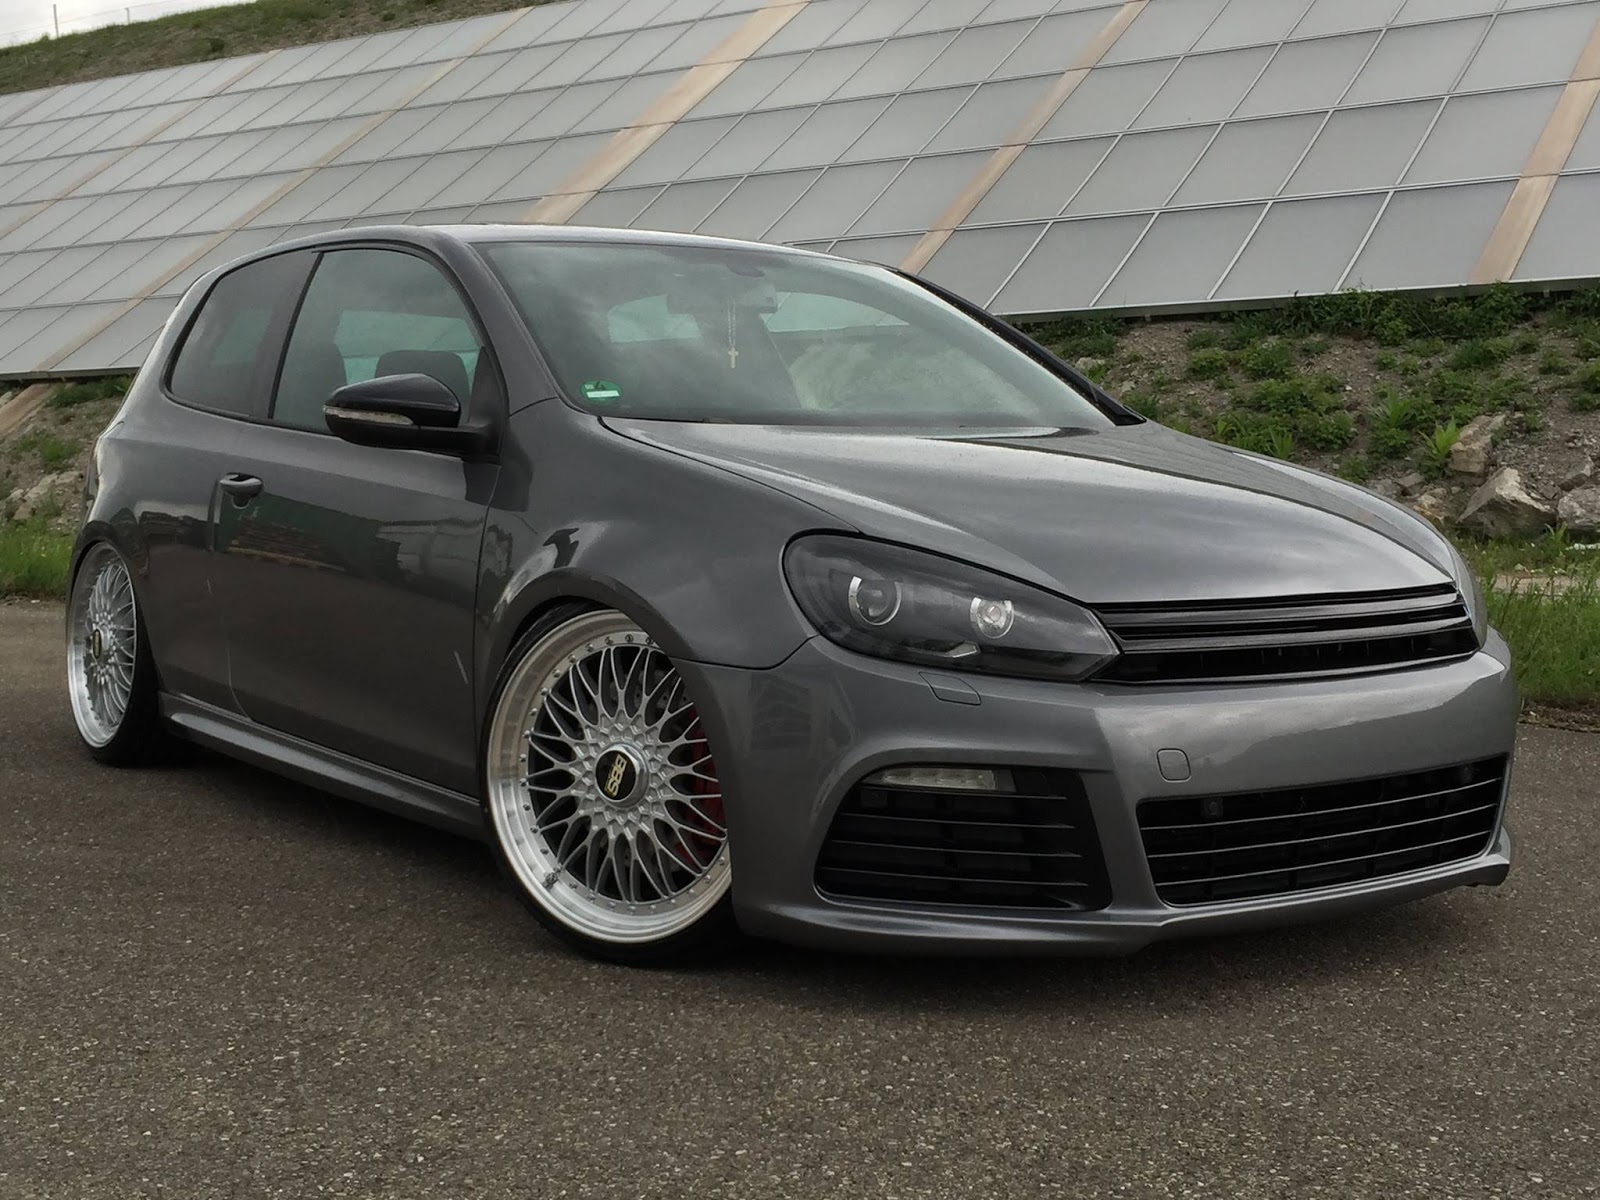 Cool Looking VW Golf Mark 6 By TVW From Wörthersee | Carscoops